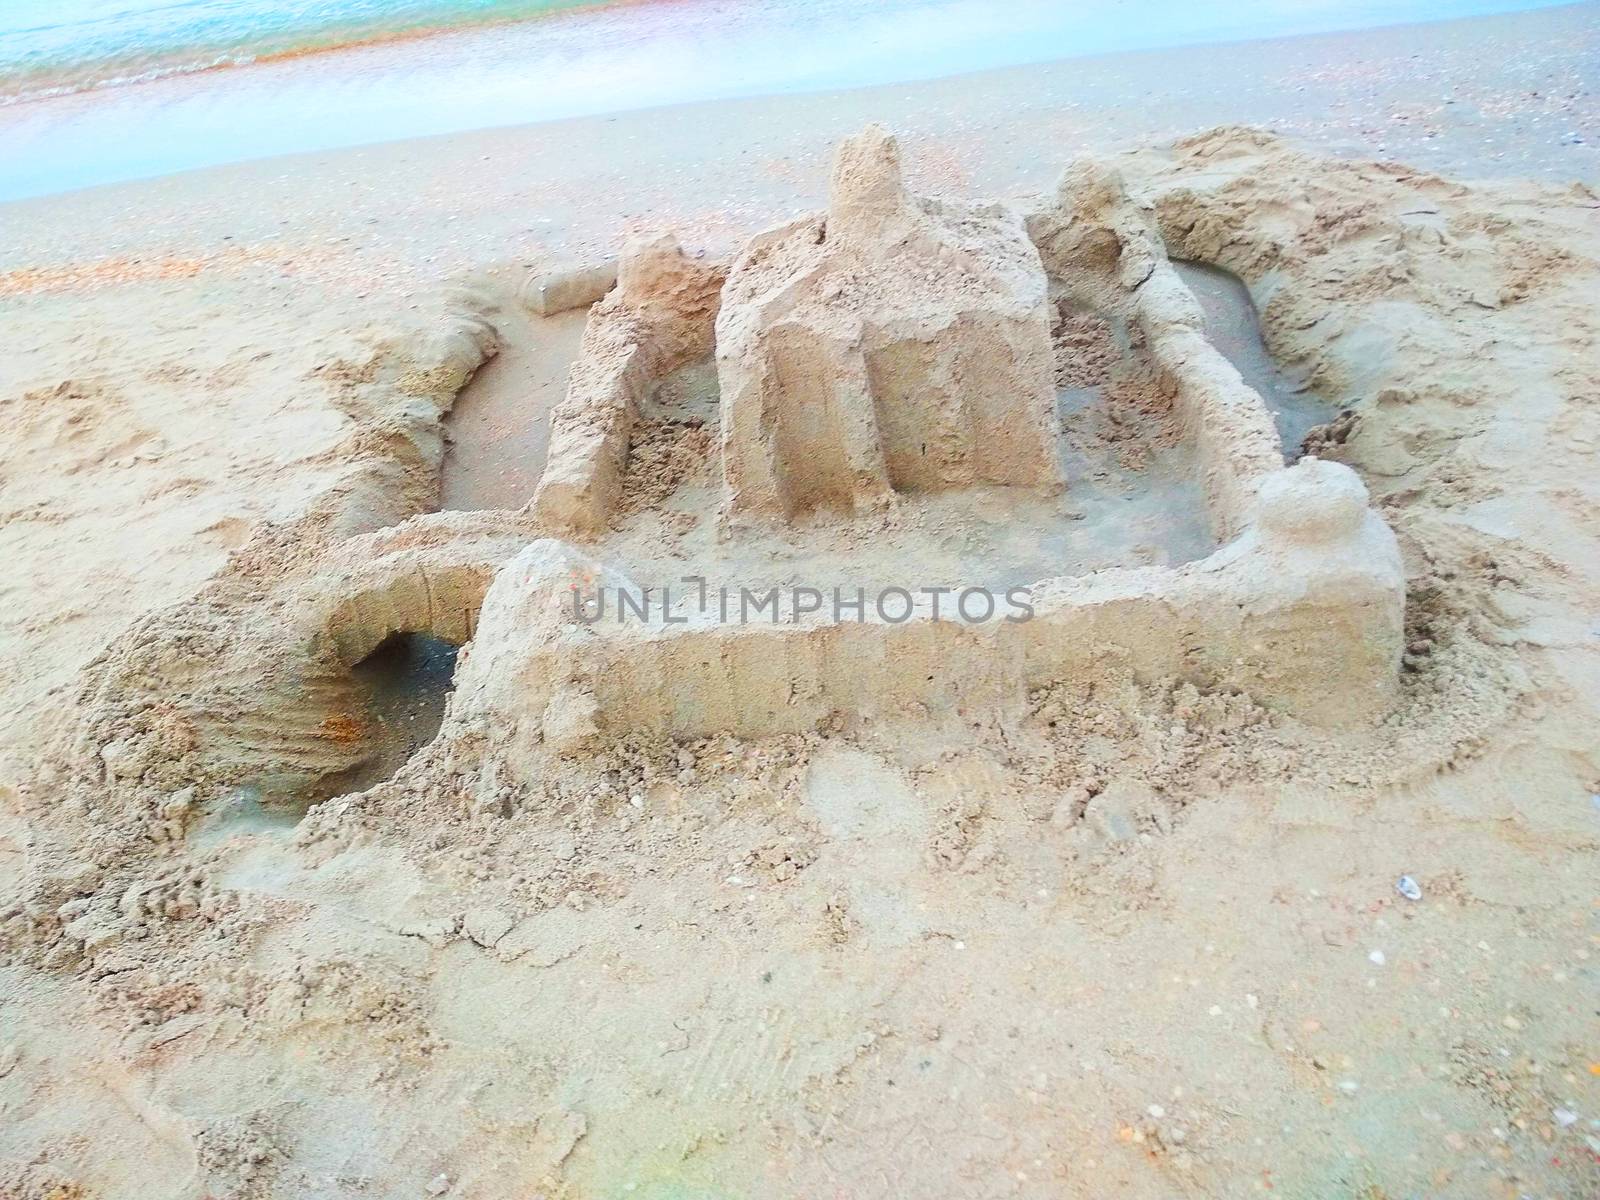 
Sculpture of a building made of sand on the beach.